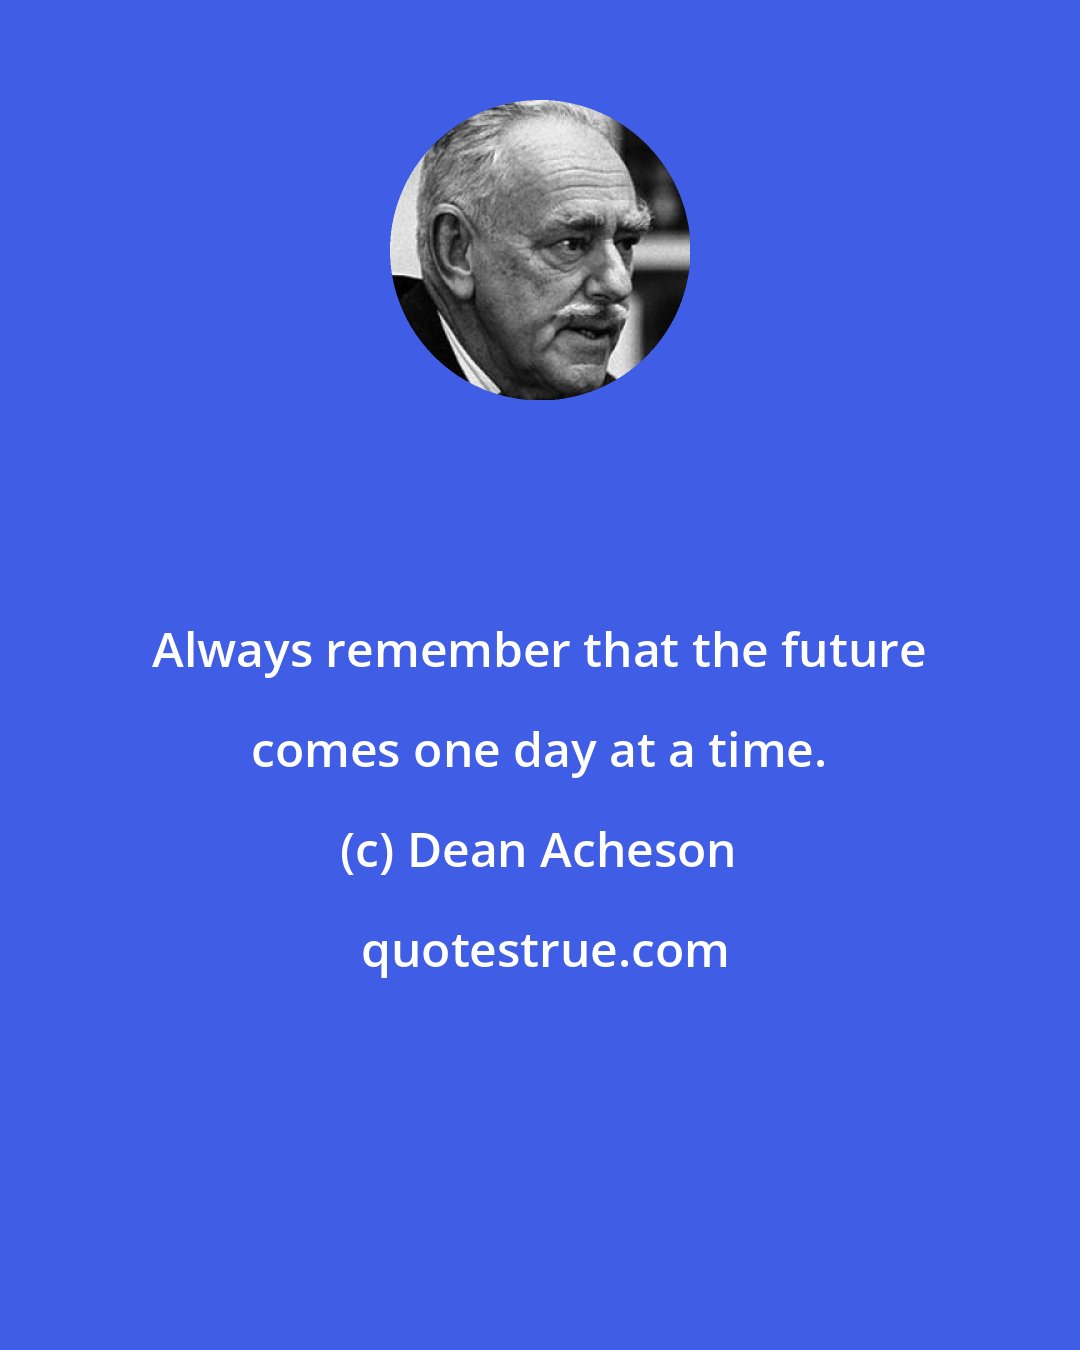 Dean Acheson: Always remember that the future comes one day at a time.